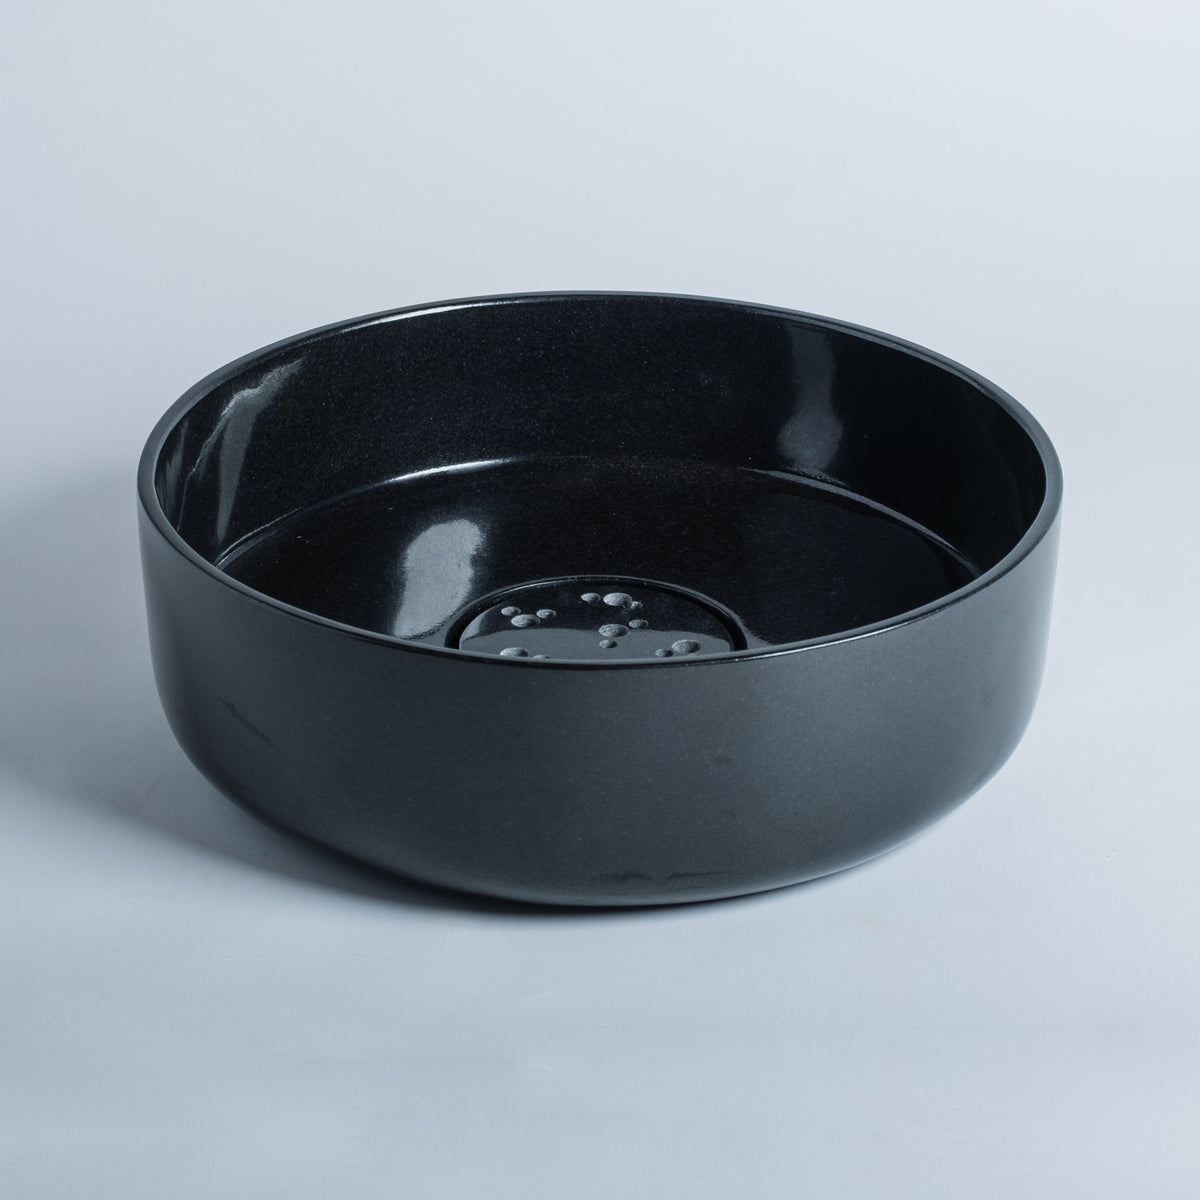 Round Vessel Sink with Drain Cover image 1 of 4